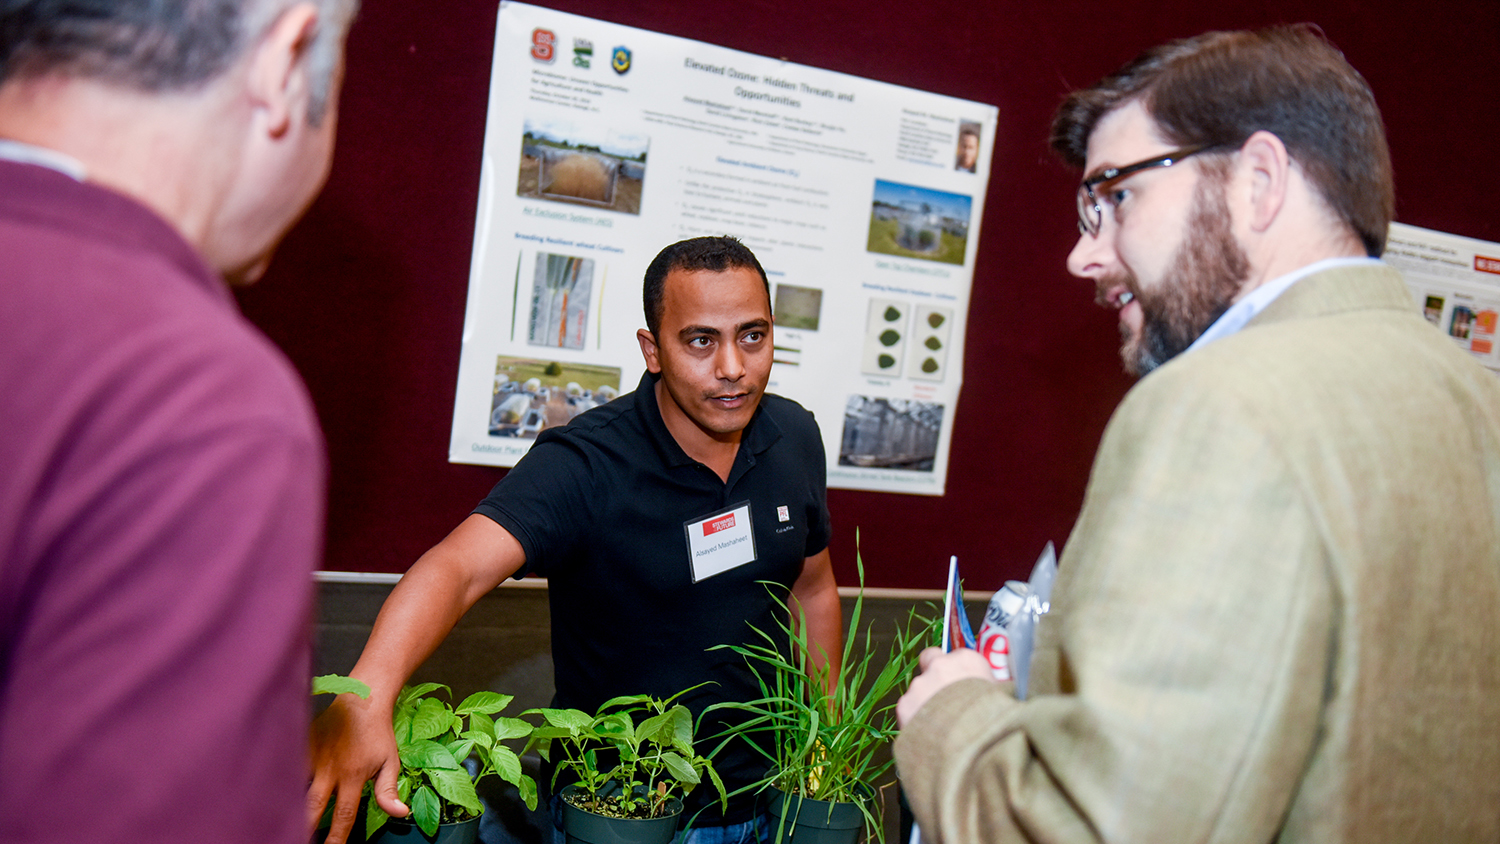 Scientist with plants explaining research to two onlookers.